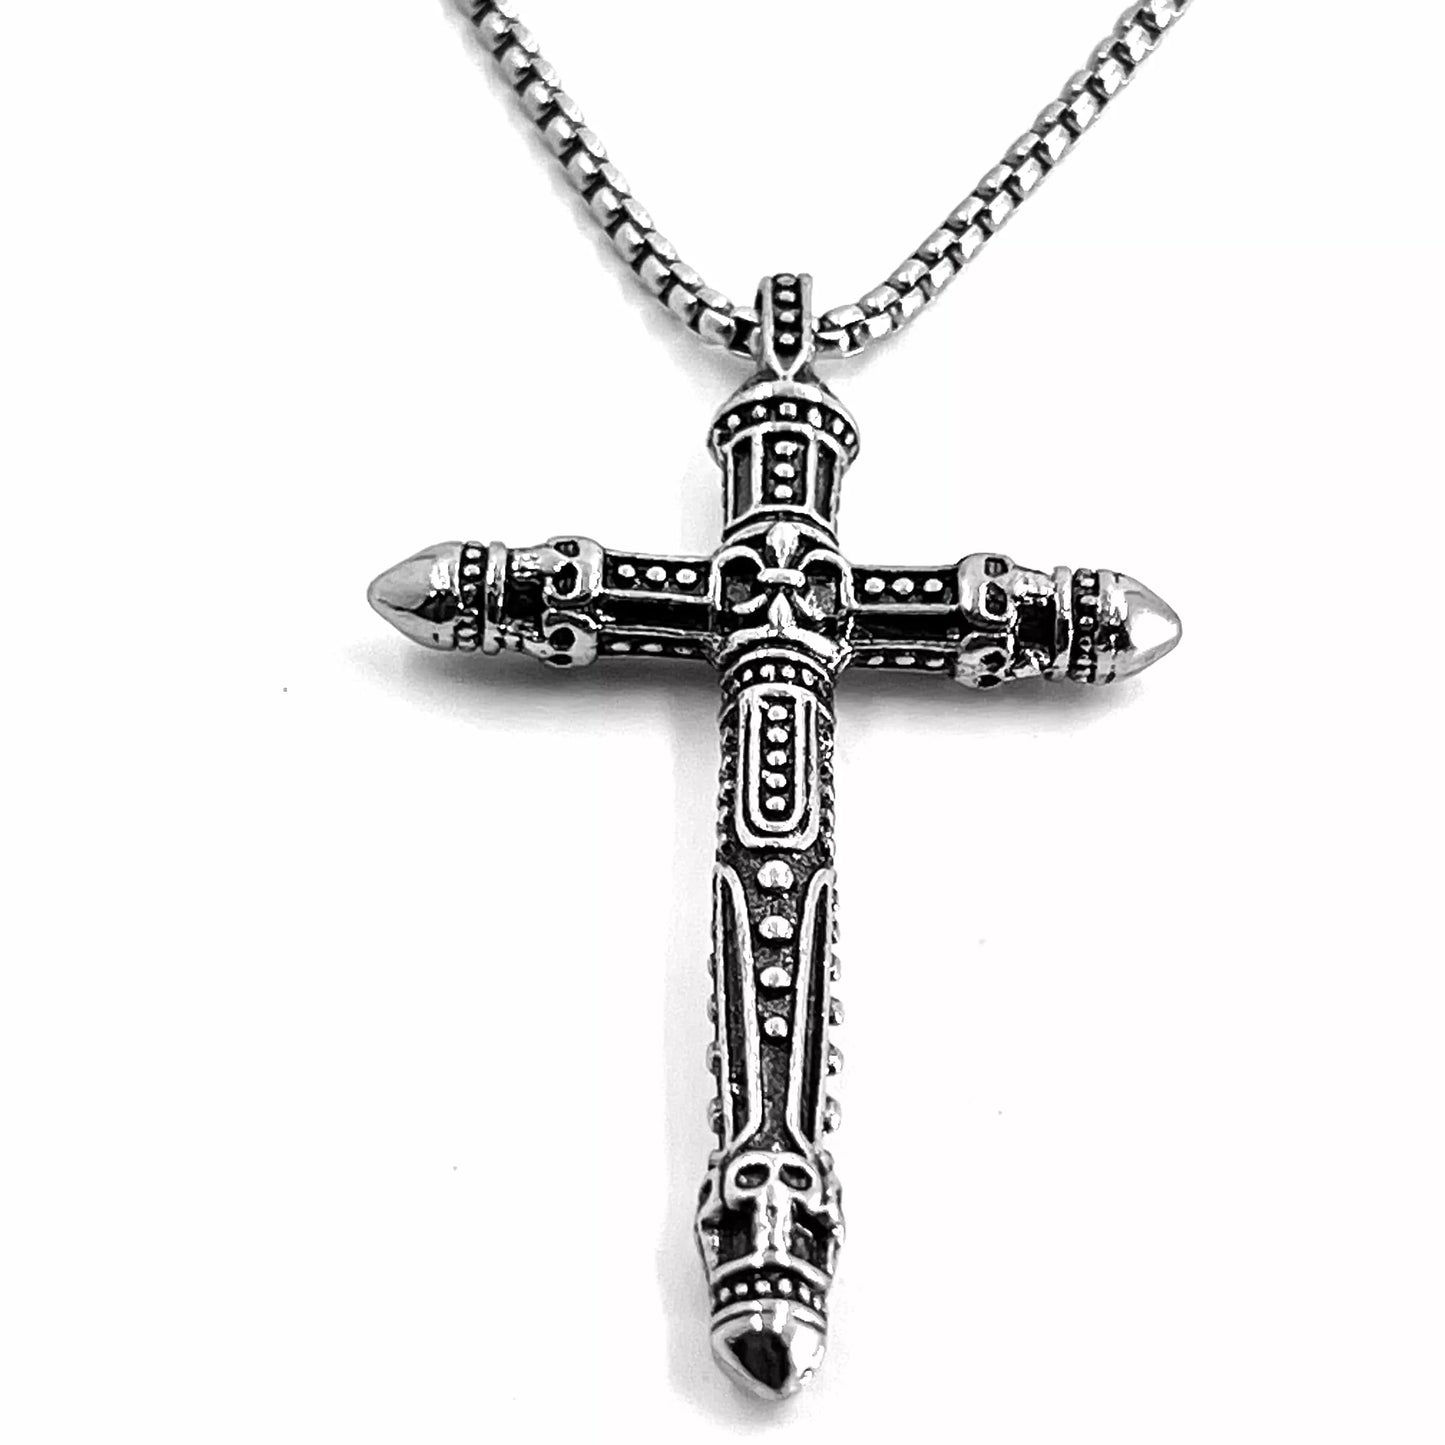 THE MEN THING Alloy Pattern Cross Pendant with Pure Stainless Steel 24inch Chain for Men, Milan trending Style - Round Box Chain & Pendant for Men & Boy